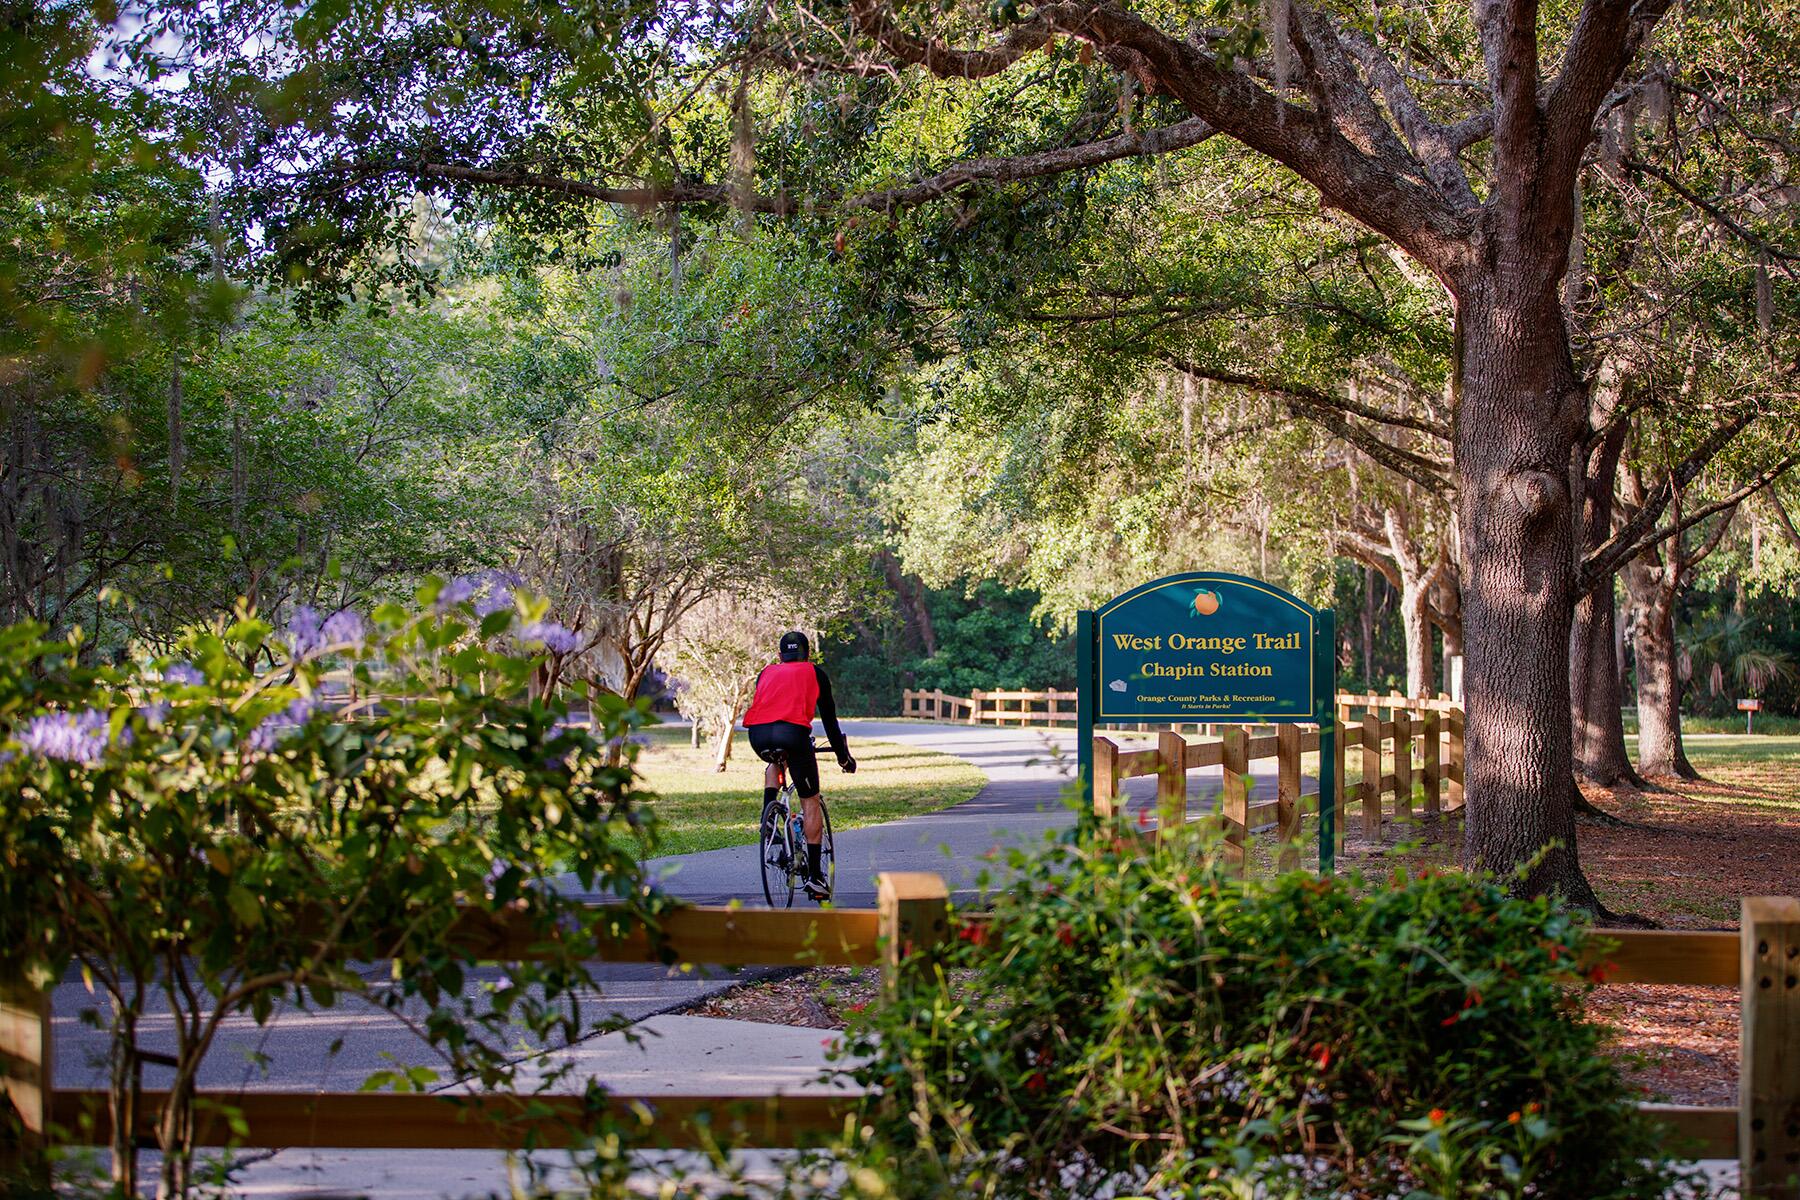 <a href='https://www.fodors.com/world/north-america/usa/florida/orlando/experiences/news/photos/best-outdoor-adventures-to-have-around-orlando-florida#'>From &quot;10 Amazing Outdoor Adventures You Can Have in Orlando: Bike, Stroll, or Blade Along the West Orange Trail&quot;</a>